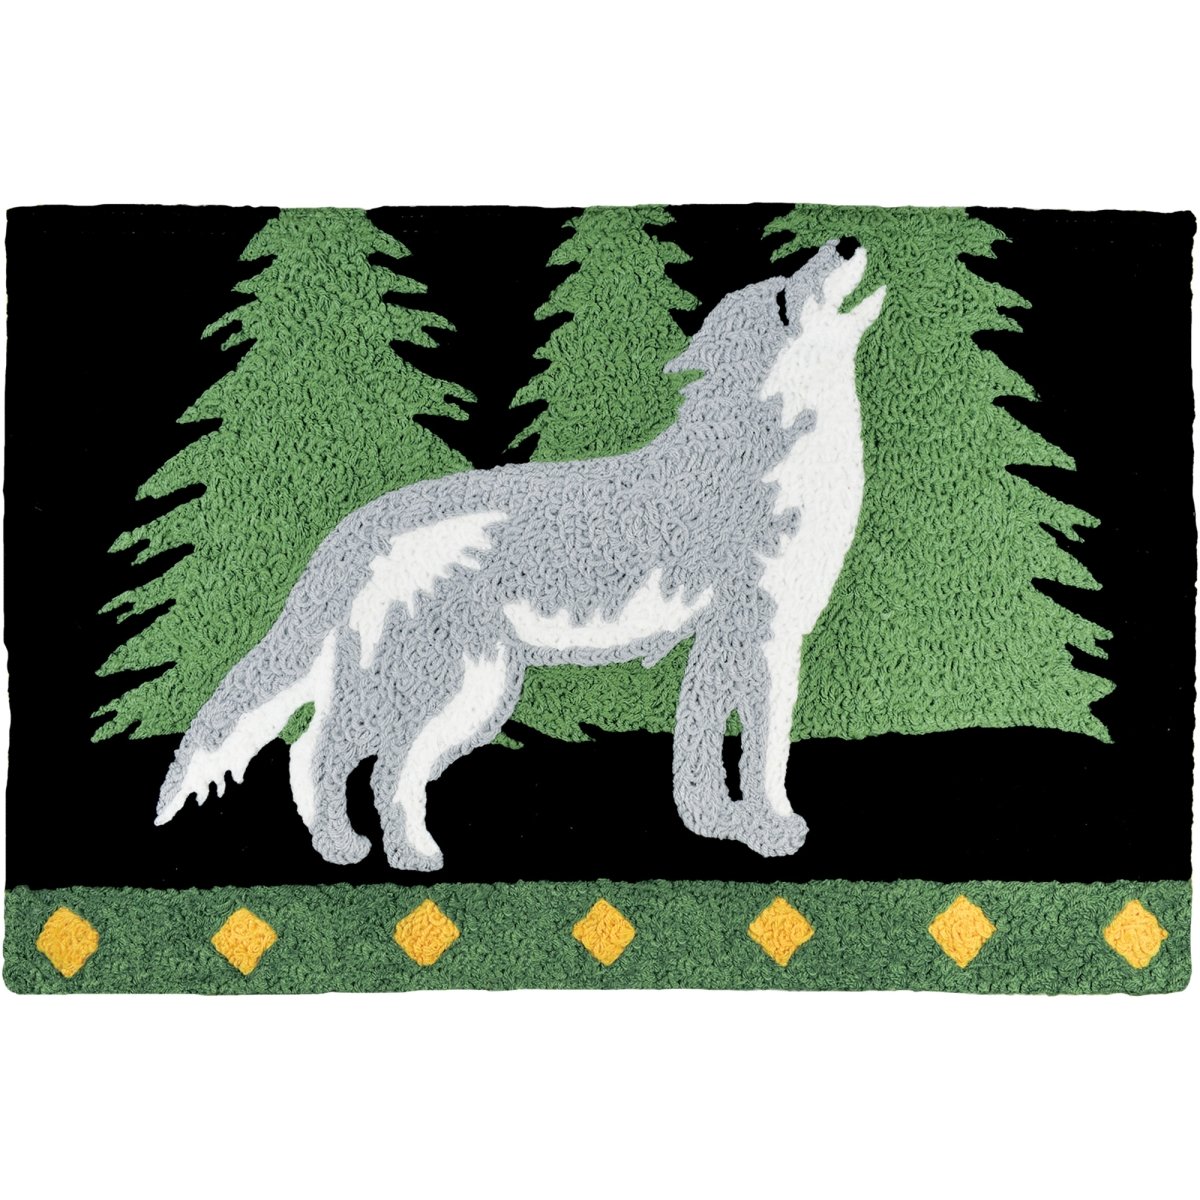 Jb-pd003 21 X 33 In. Howling Wolf Rug